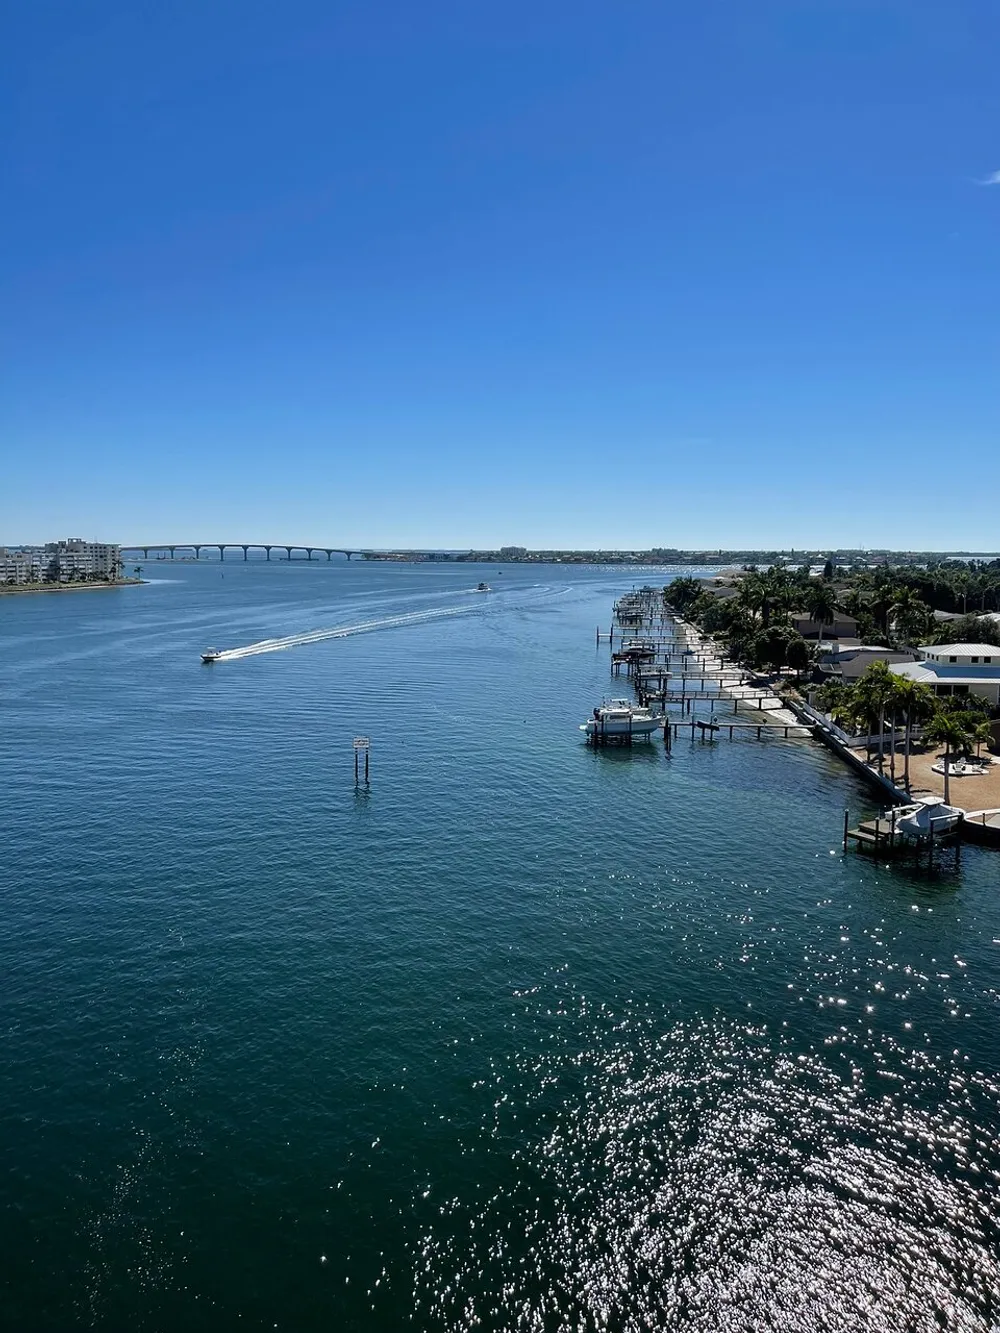 The image shows a sunny coastal scene with a clear blue sky a calm expanse of water with boat activity a long bridge in the distance and waterfront properties to the right